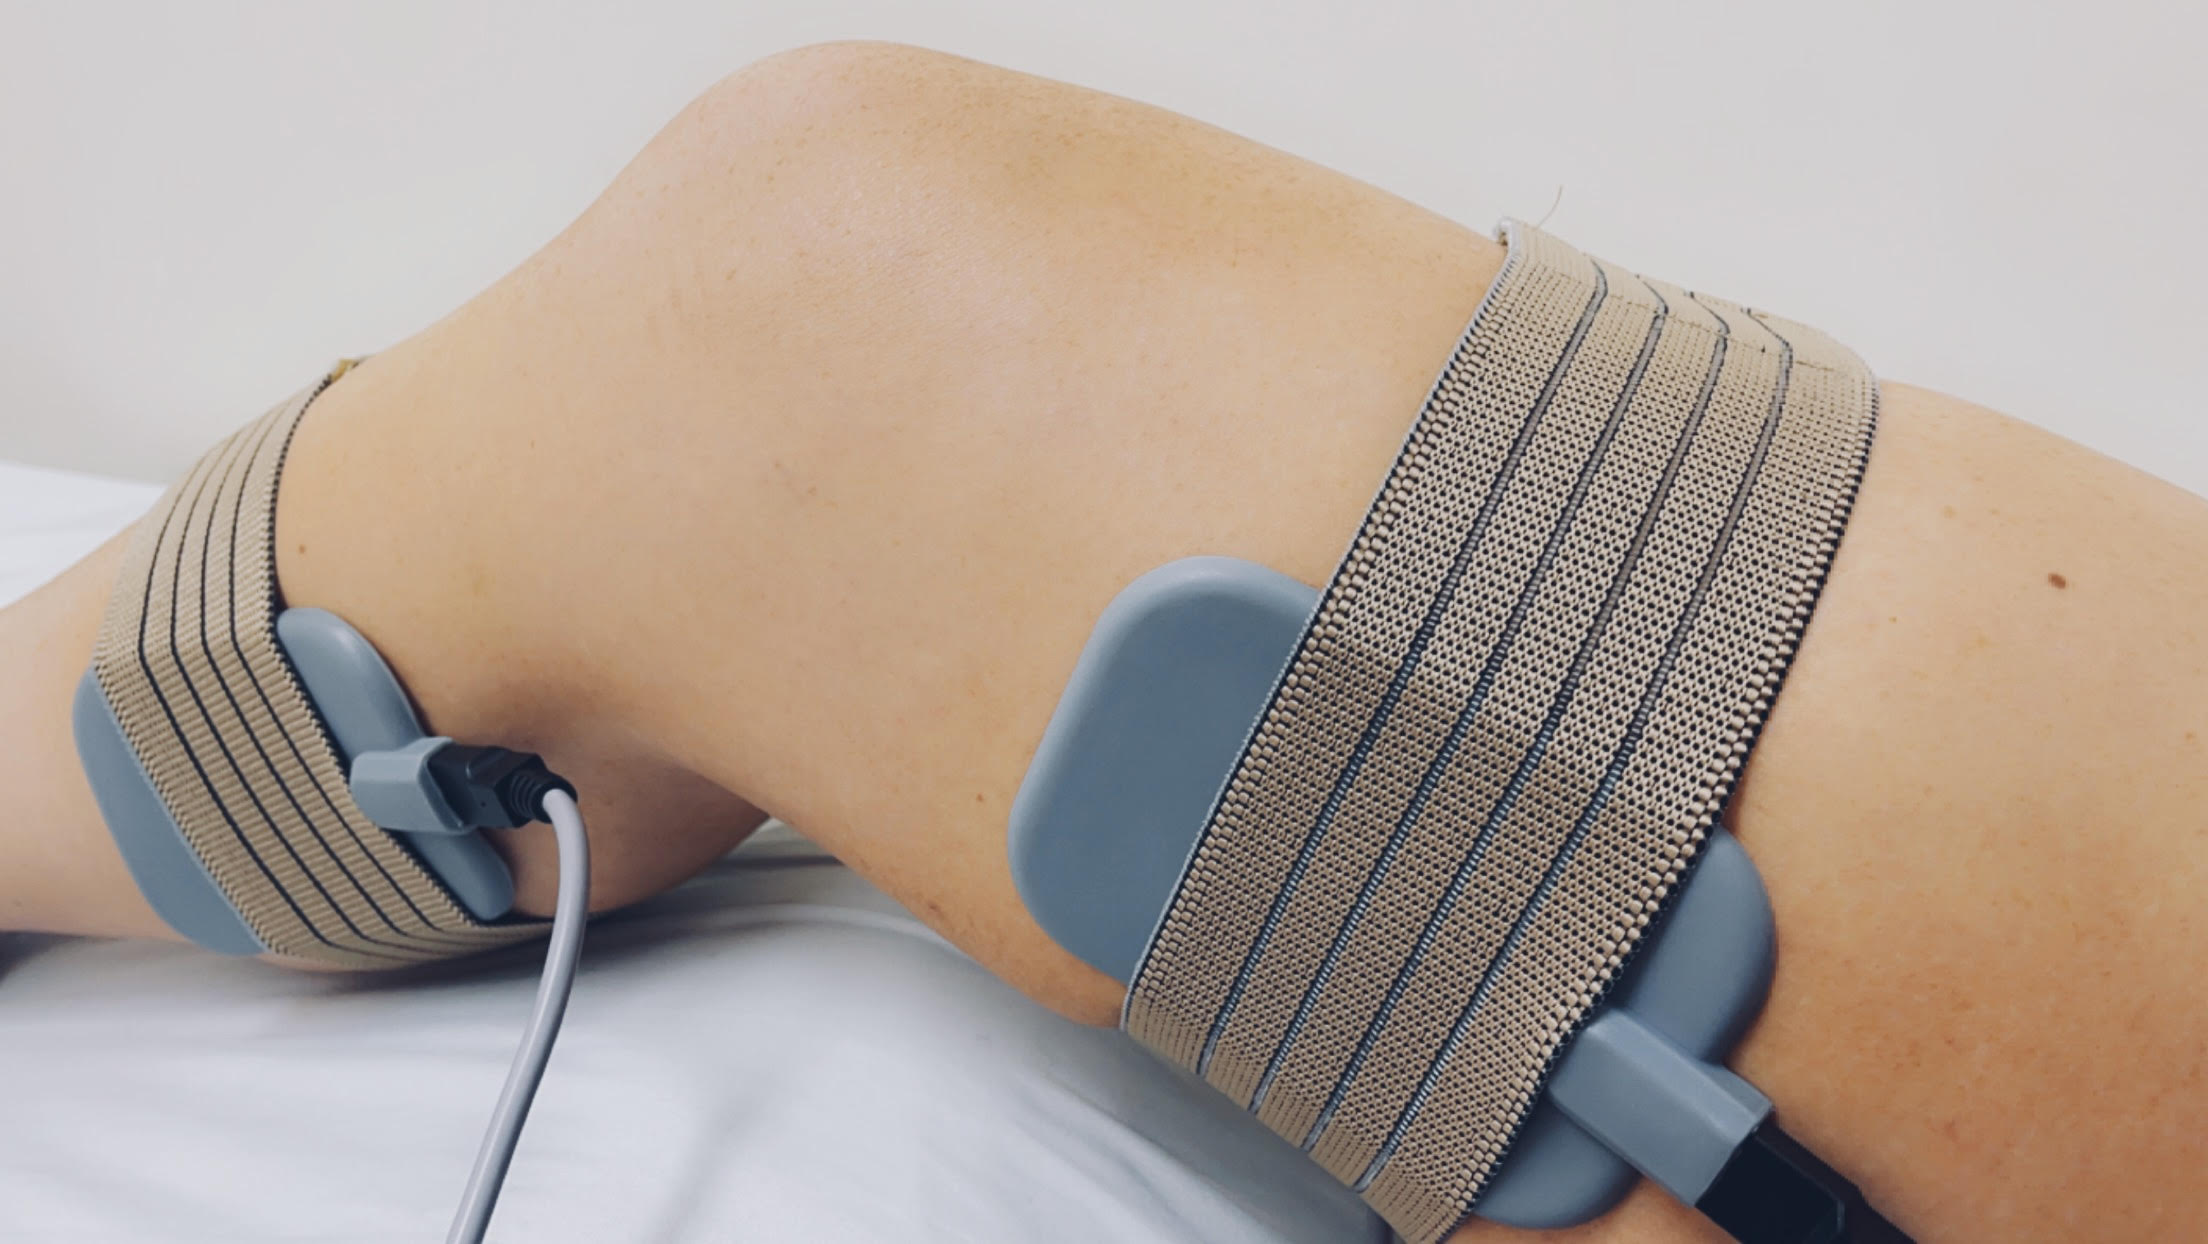 Benefits of Electrical Muscle Stimulation (EMS) for Muscle Recovery